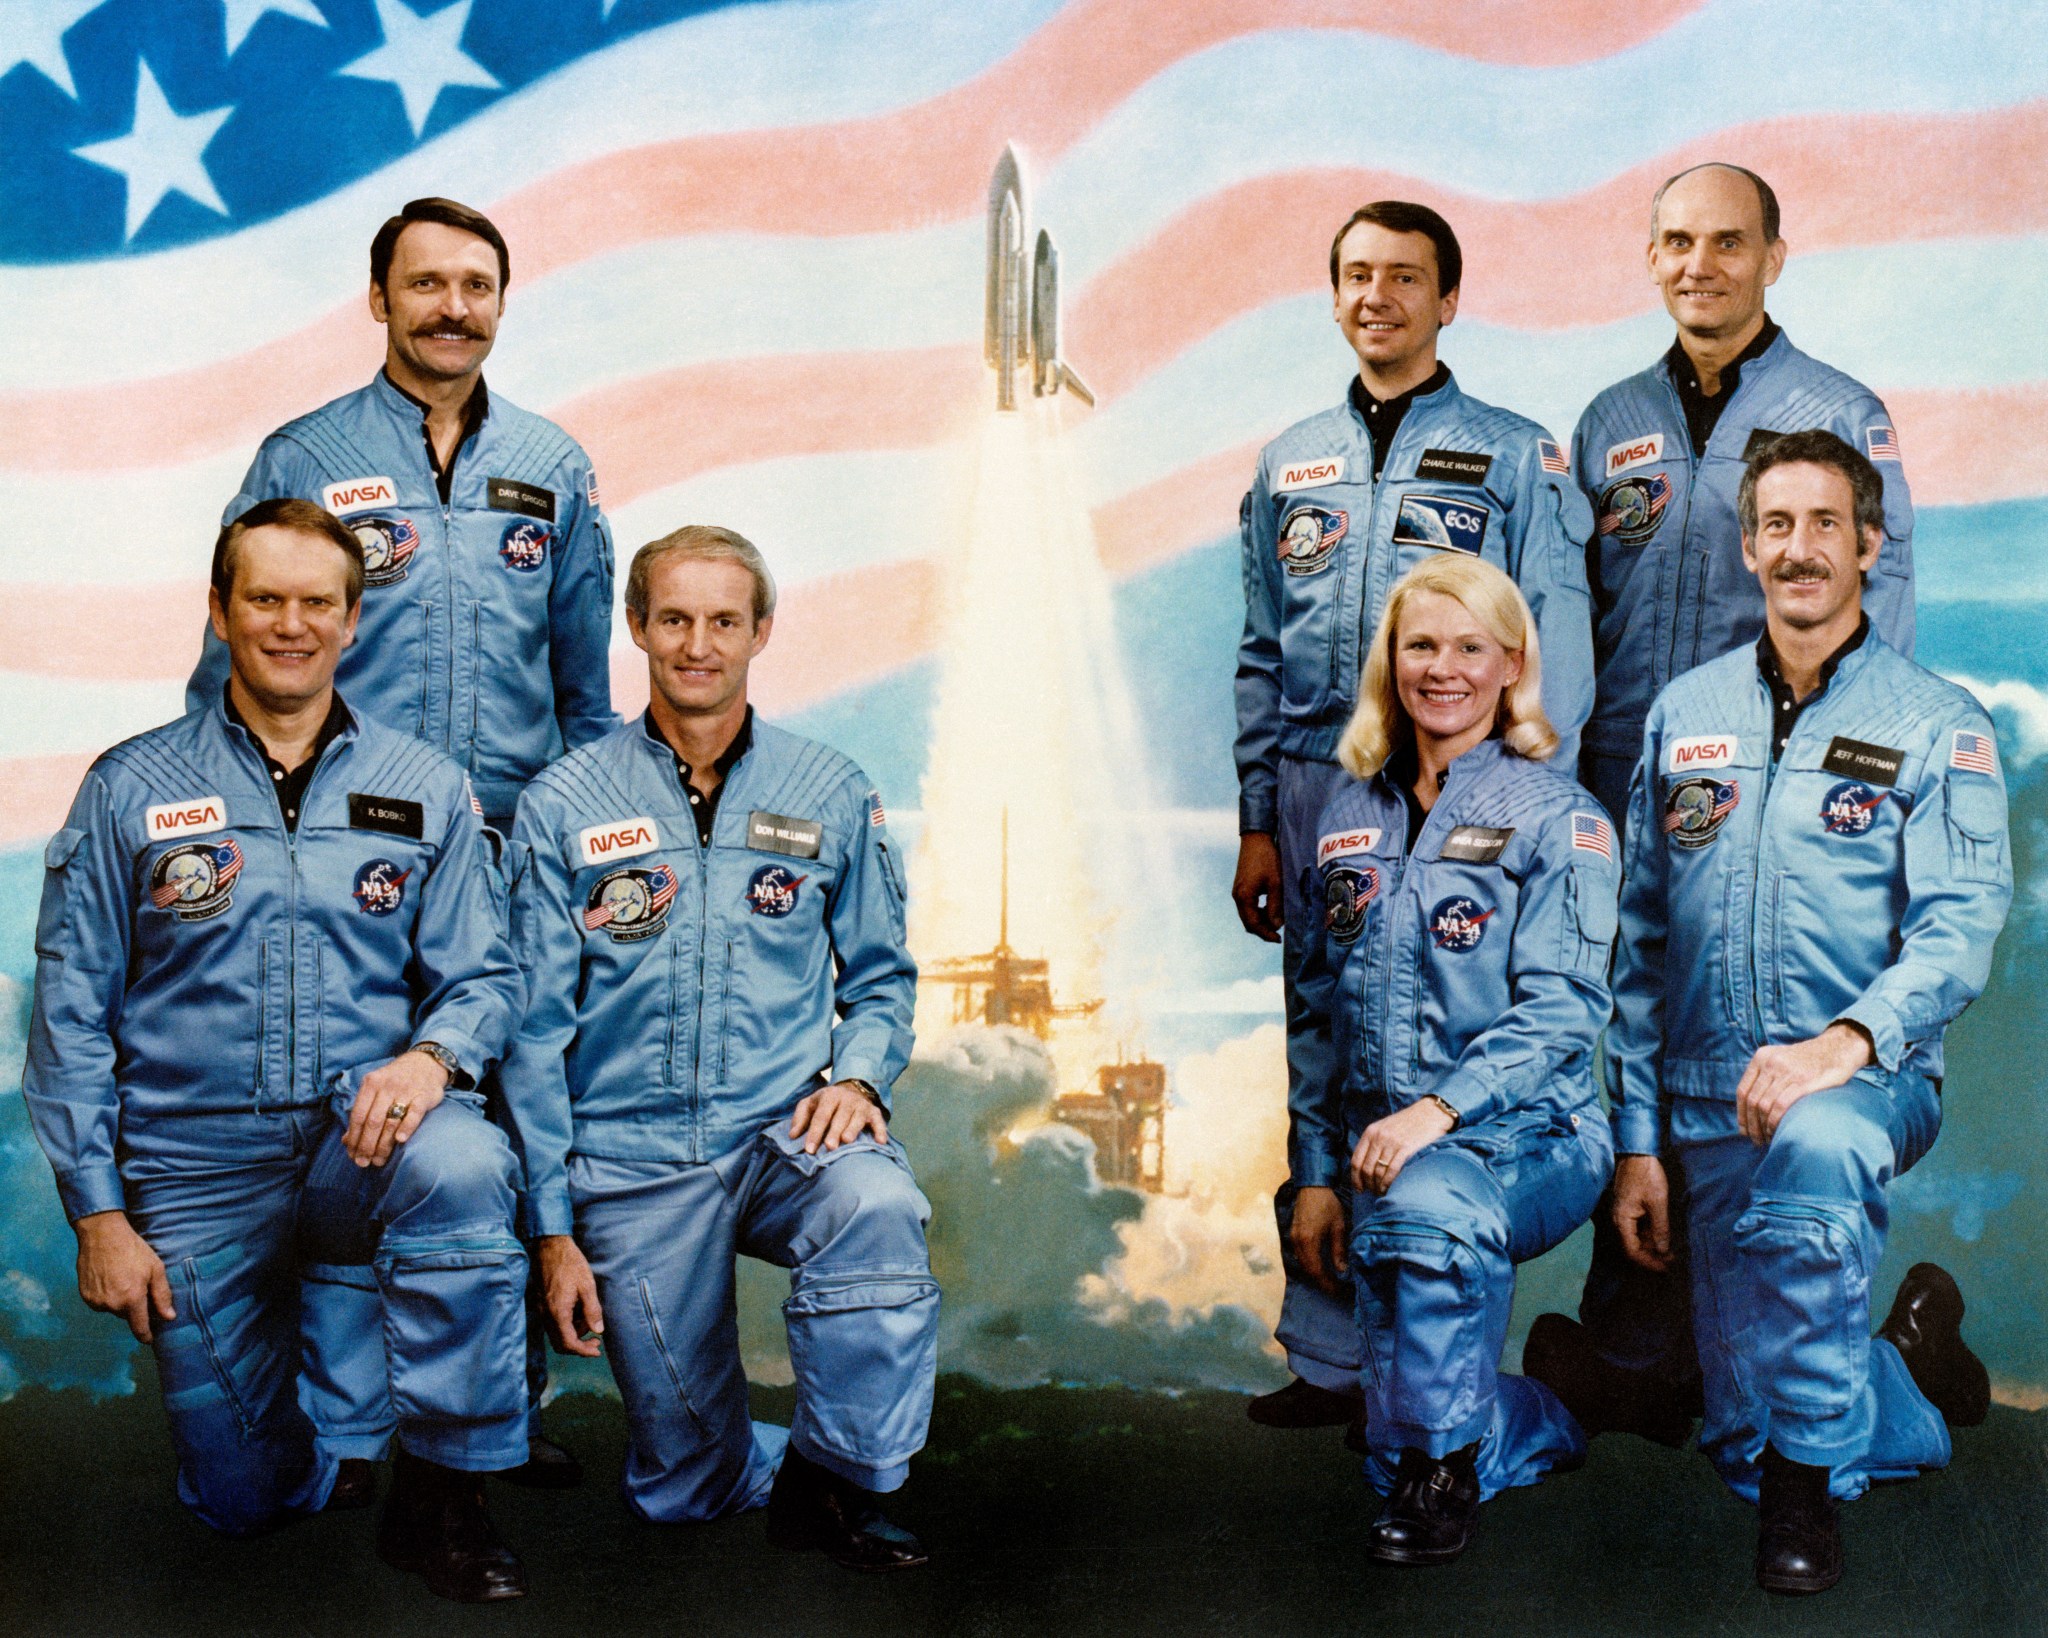 STS-51D Crew Portrait with U.S. flag in the background and an image of a shuttle launch.